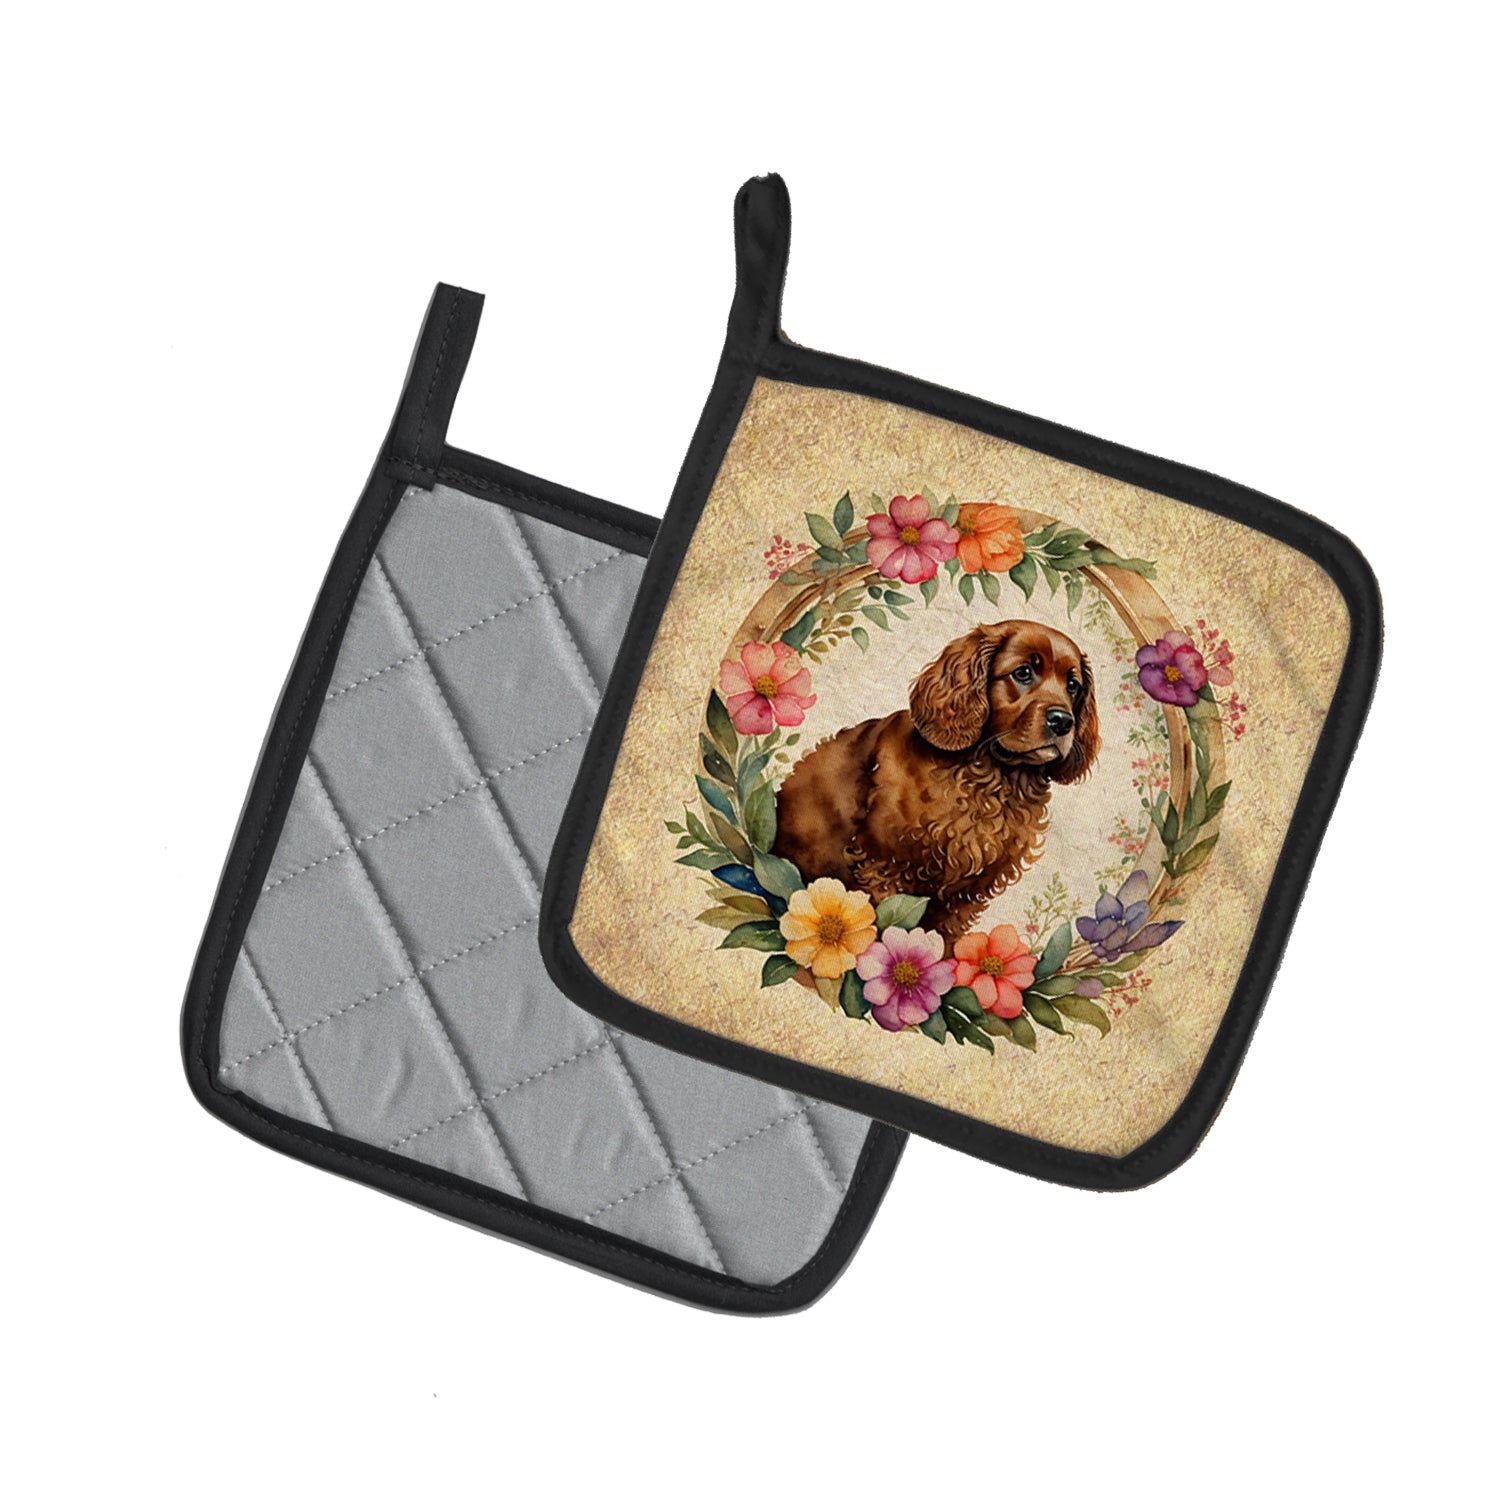 Buy this American Water Spaniel and Flowers Pair of Pot Holders